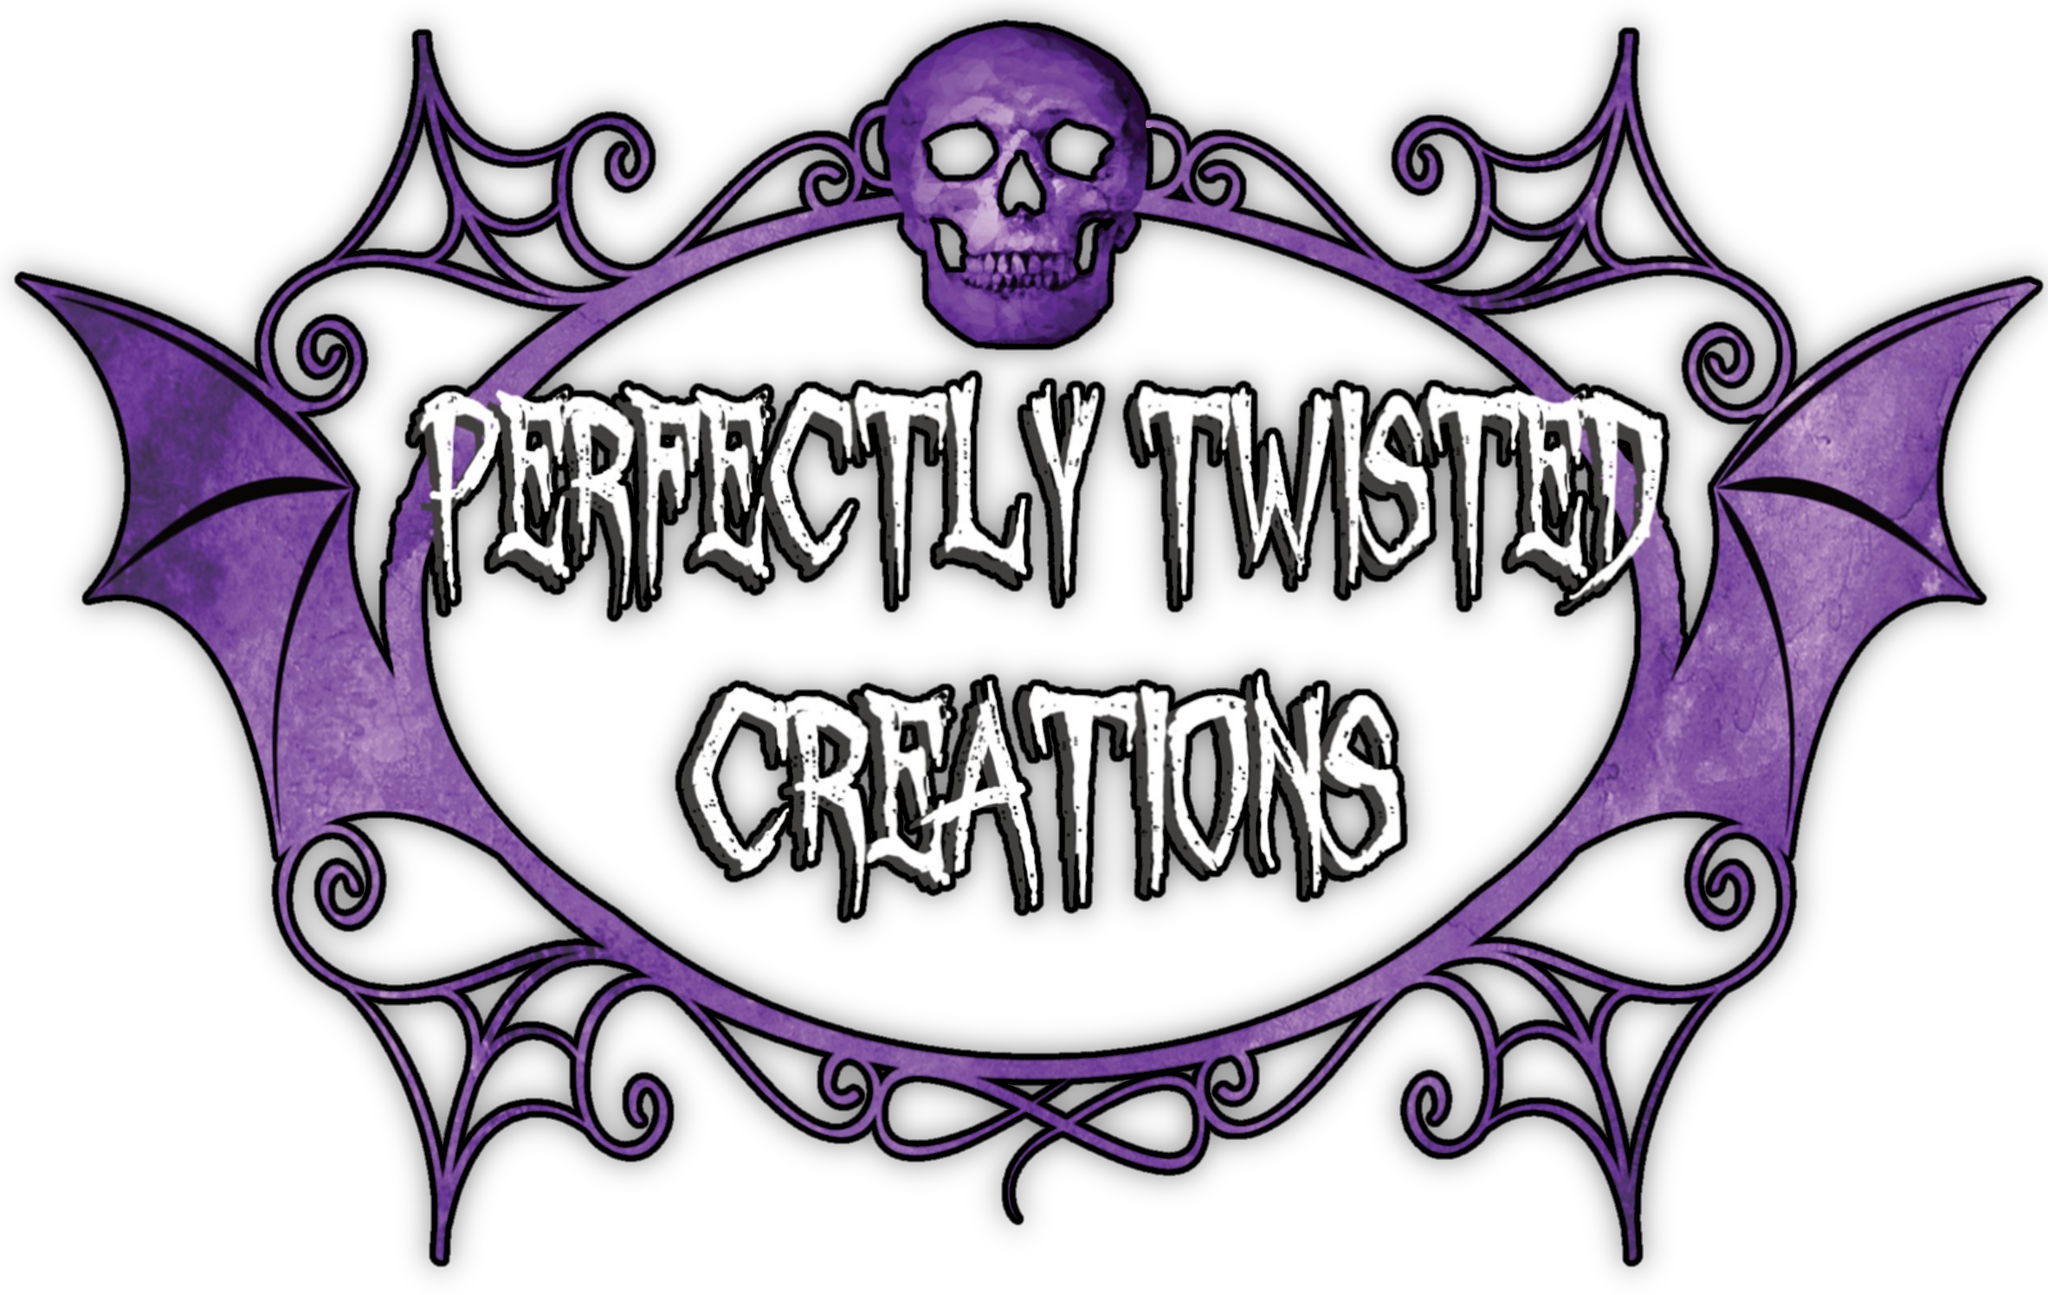 Perfectly Twisted Creations